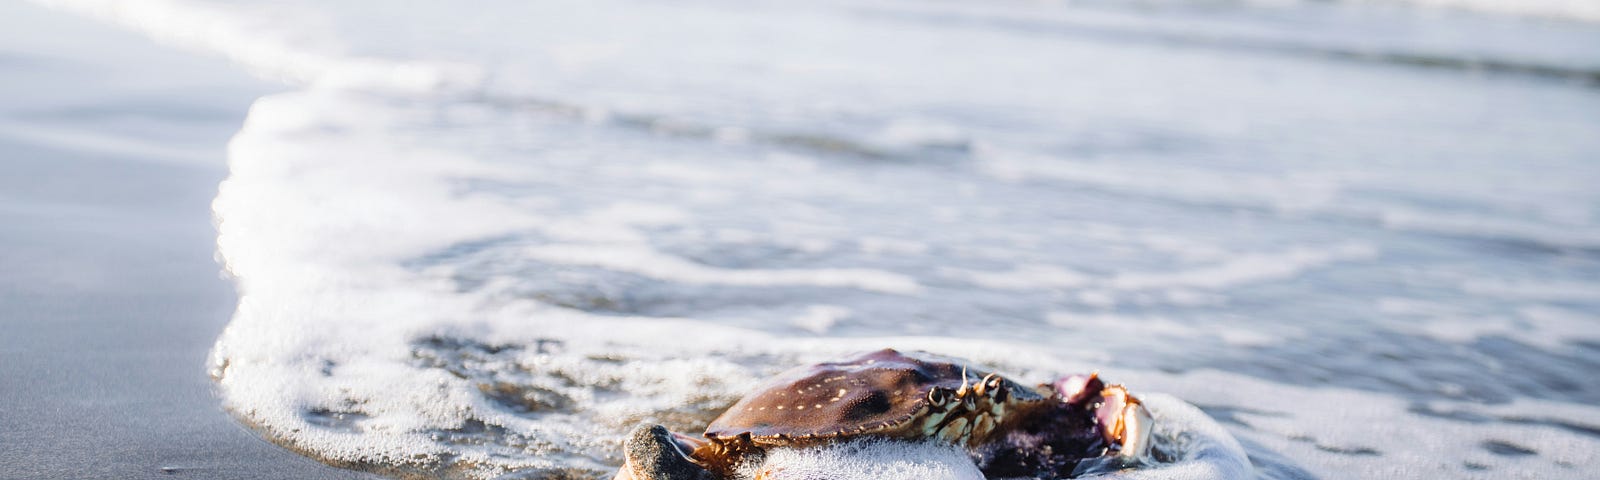 A crab is swept by an ocean’s wave on the beach.